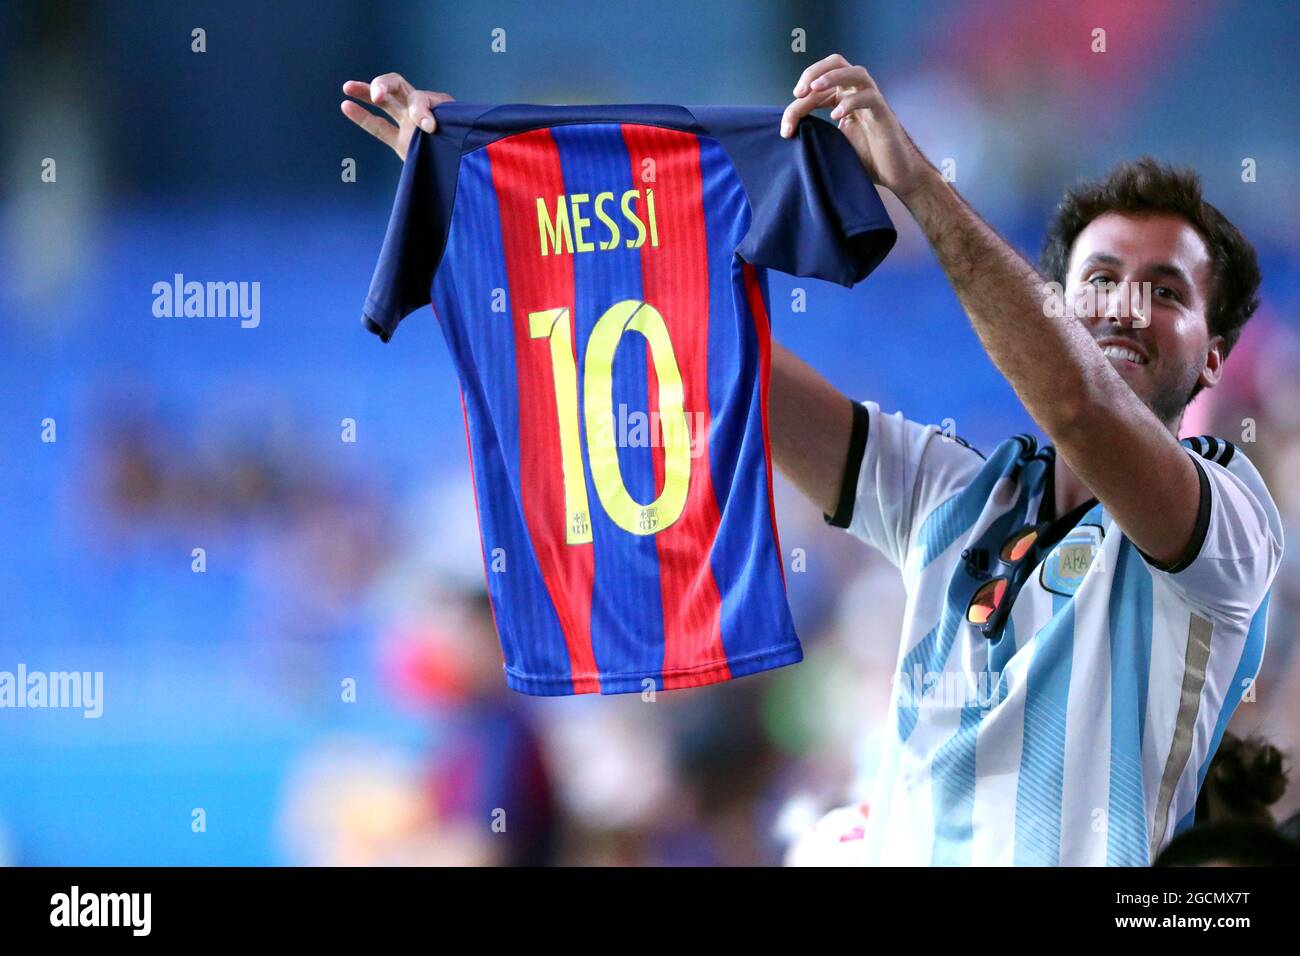 Barcelona fan shows Messi's shirt during the Joan Gamper Trophy match  between Fc Barcelona and Juventus Fc . Fc Barcelona wins 3-0 over Juventus  Fc Stock Photo - Alamy